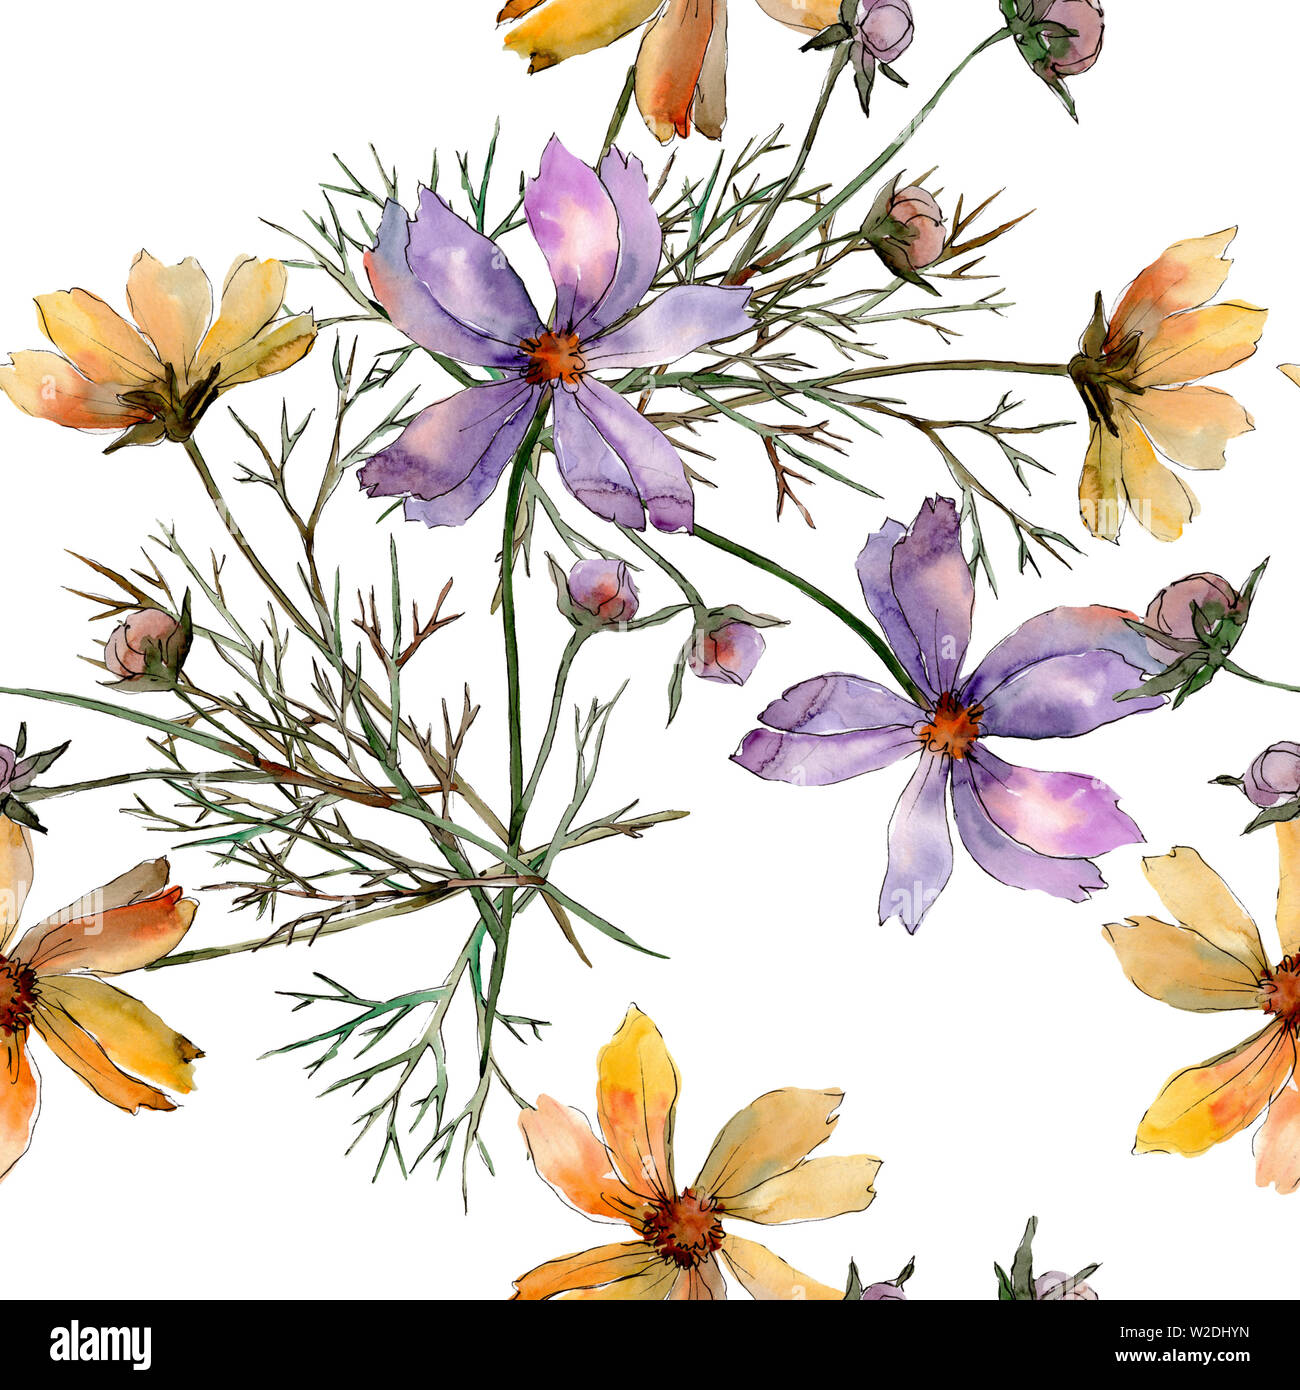 Cosmos flower floral botanical flowers. Watercolor background illustration set. Seamless background pattern. Stock Photo